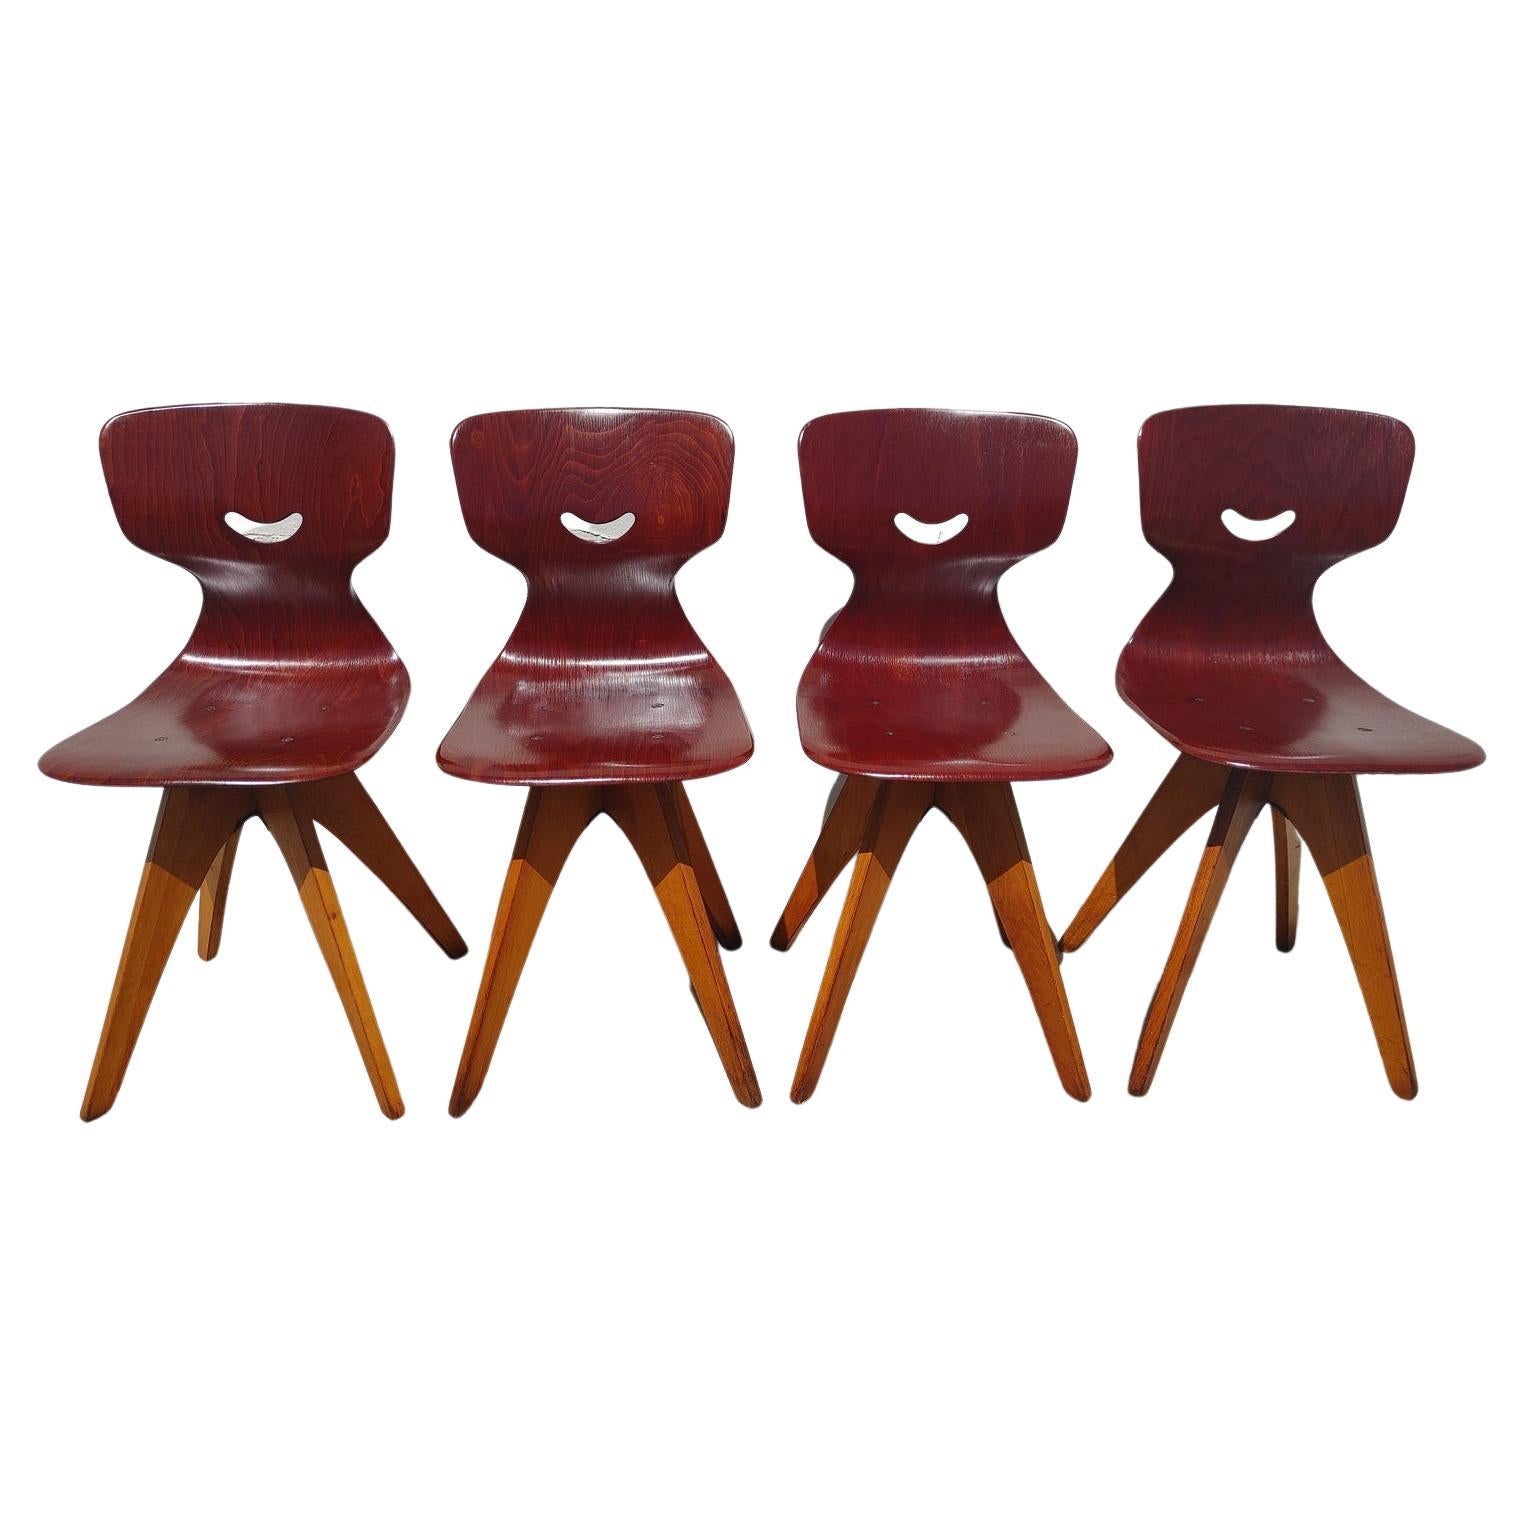 Set of 4 Mid Century Modern German Bentwood Chairs

Above average vintage condition and structurally sound. Has some expected slight finish wear and scratching. Seats and backs are in above average condition, legs have some finish wear and dings.